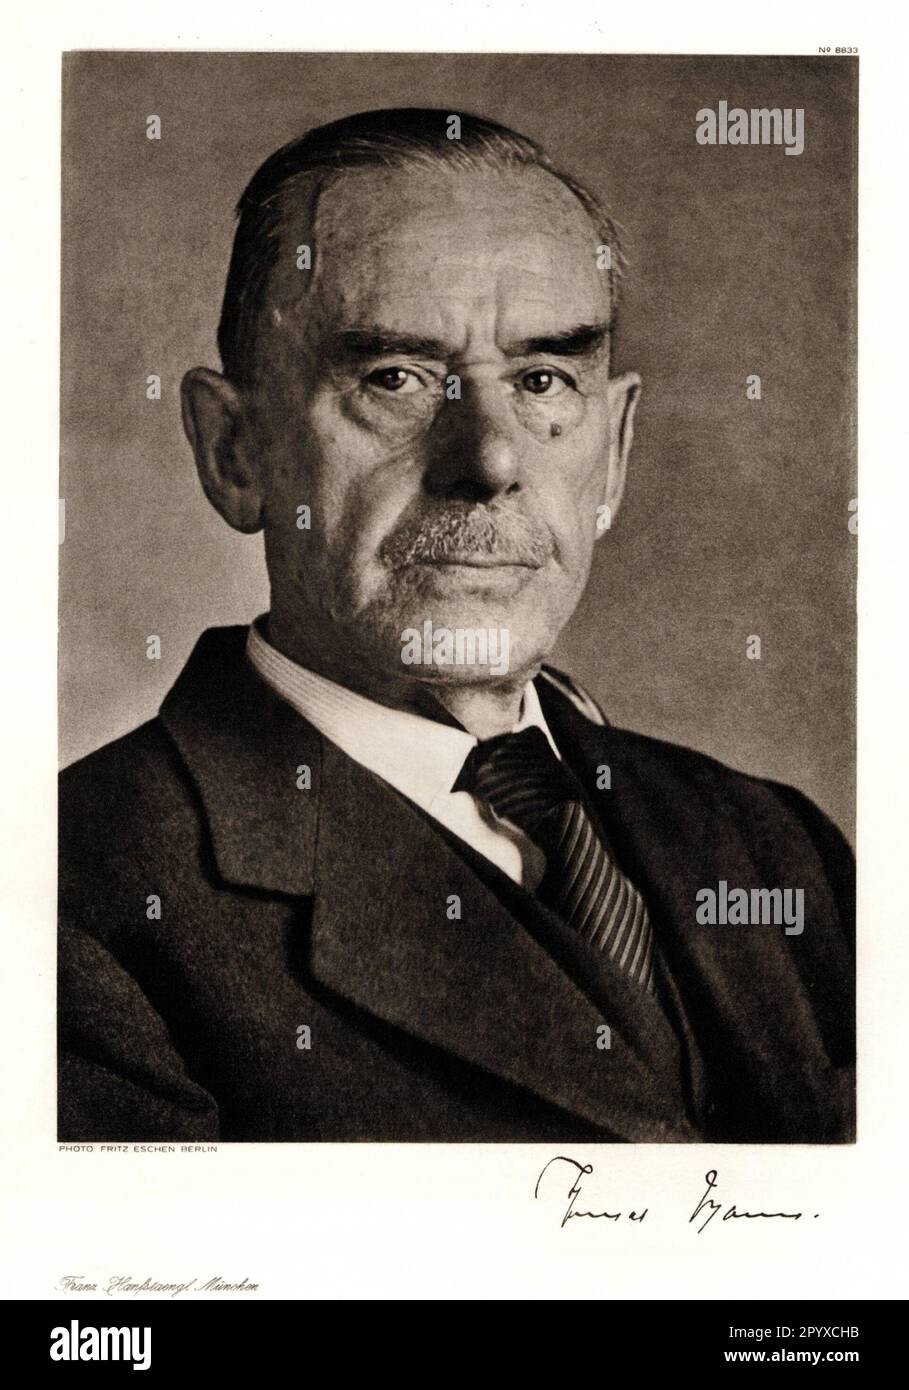 Thomas Mann (1875-1955), German writer and Nobel Prize winner (1929). Photograph by Fritz Eschen, Berlin. Photo: Heliogravure, Corpus Imaginum, Hanfstaengl Collection. Undated photograph, probably from the 1920s. Undated photograph, probably from the late 1940s. [automated translation] Stock Photo